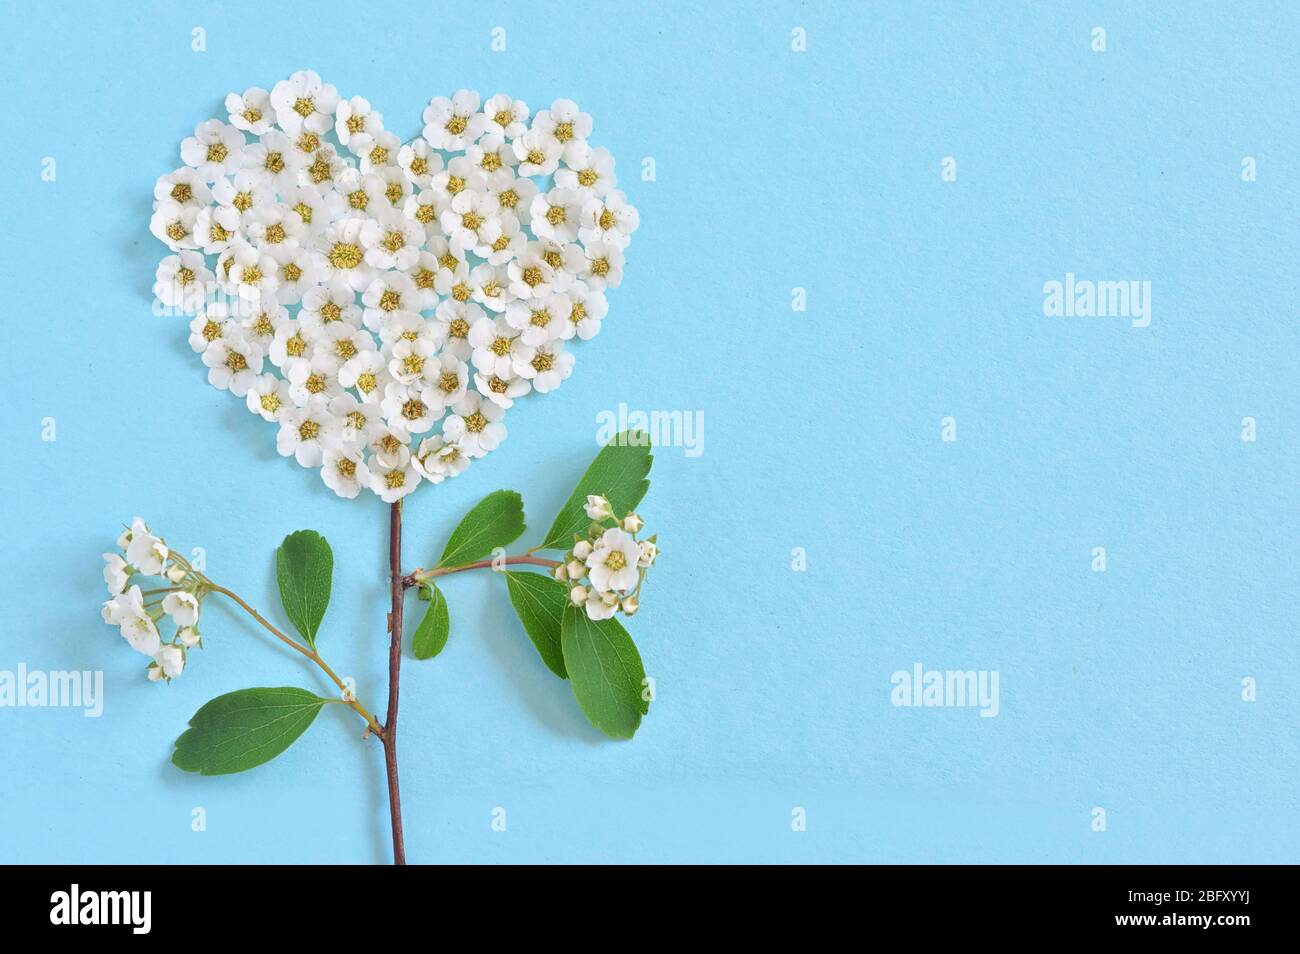 Concept of A White Spiraea Flowering in heart shape Stock Photo